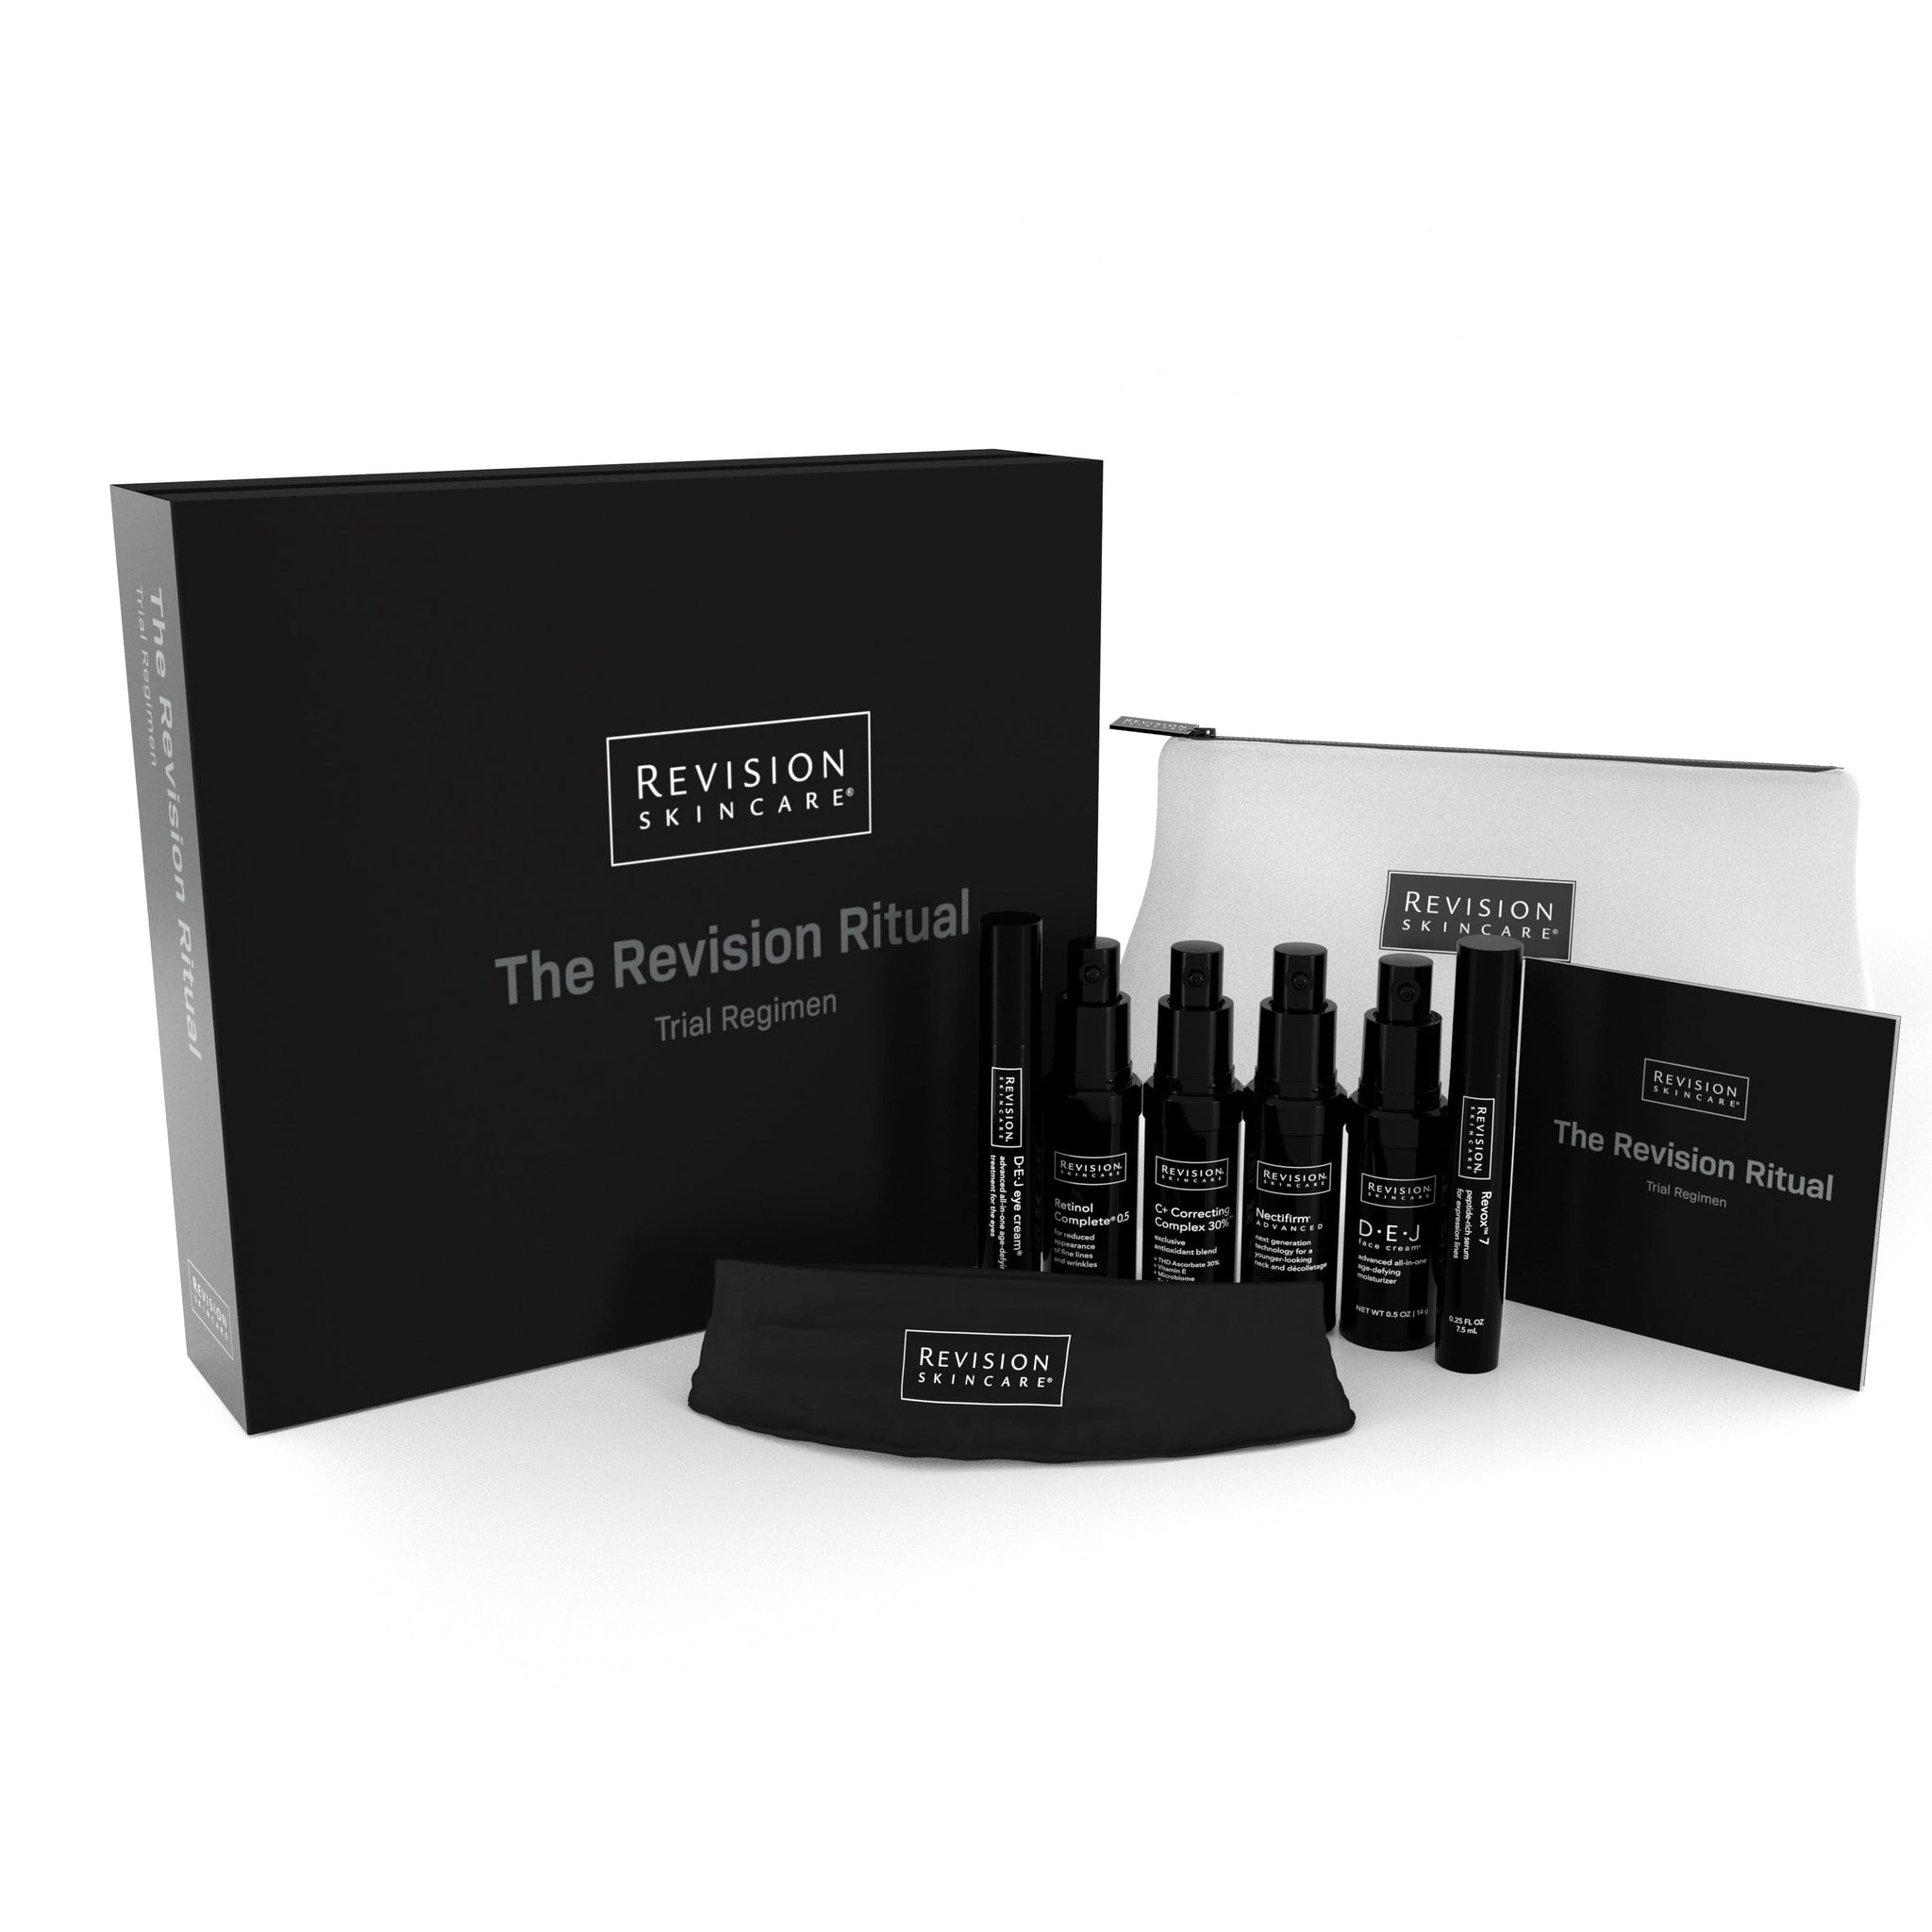 The Revision Ritual Limited Edition Trial Regimen Kit